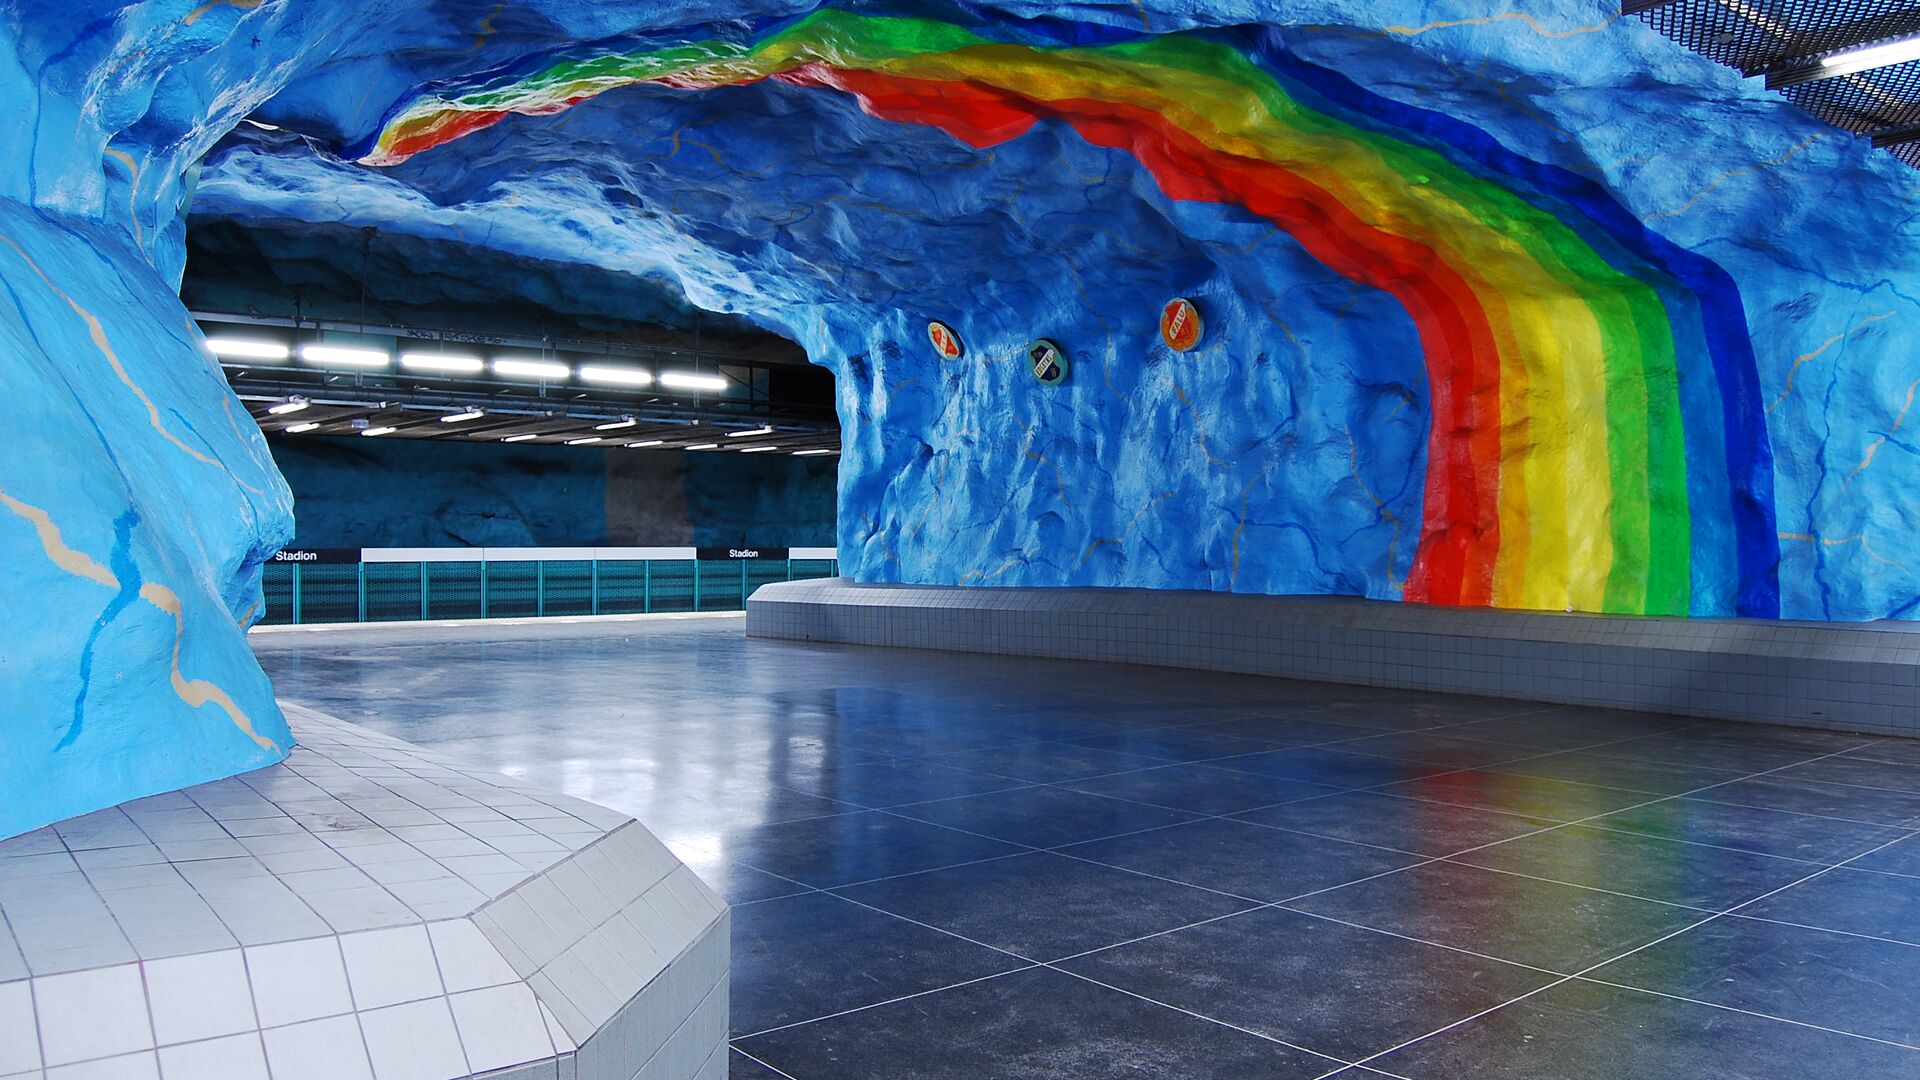 Inside the Stockholm metro with artistic murals